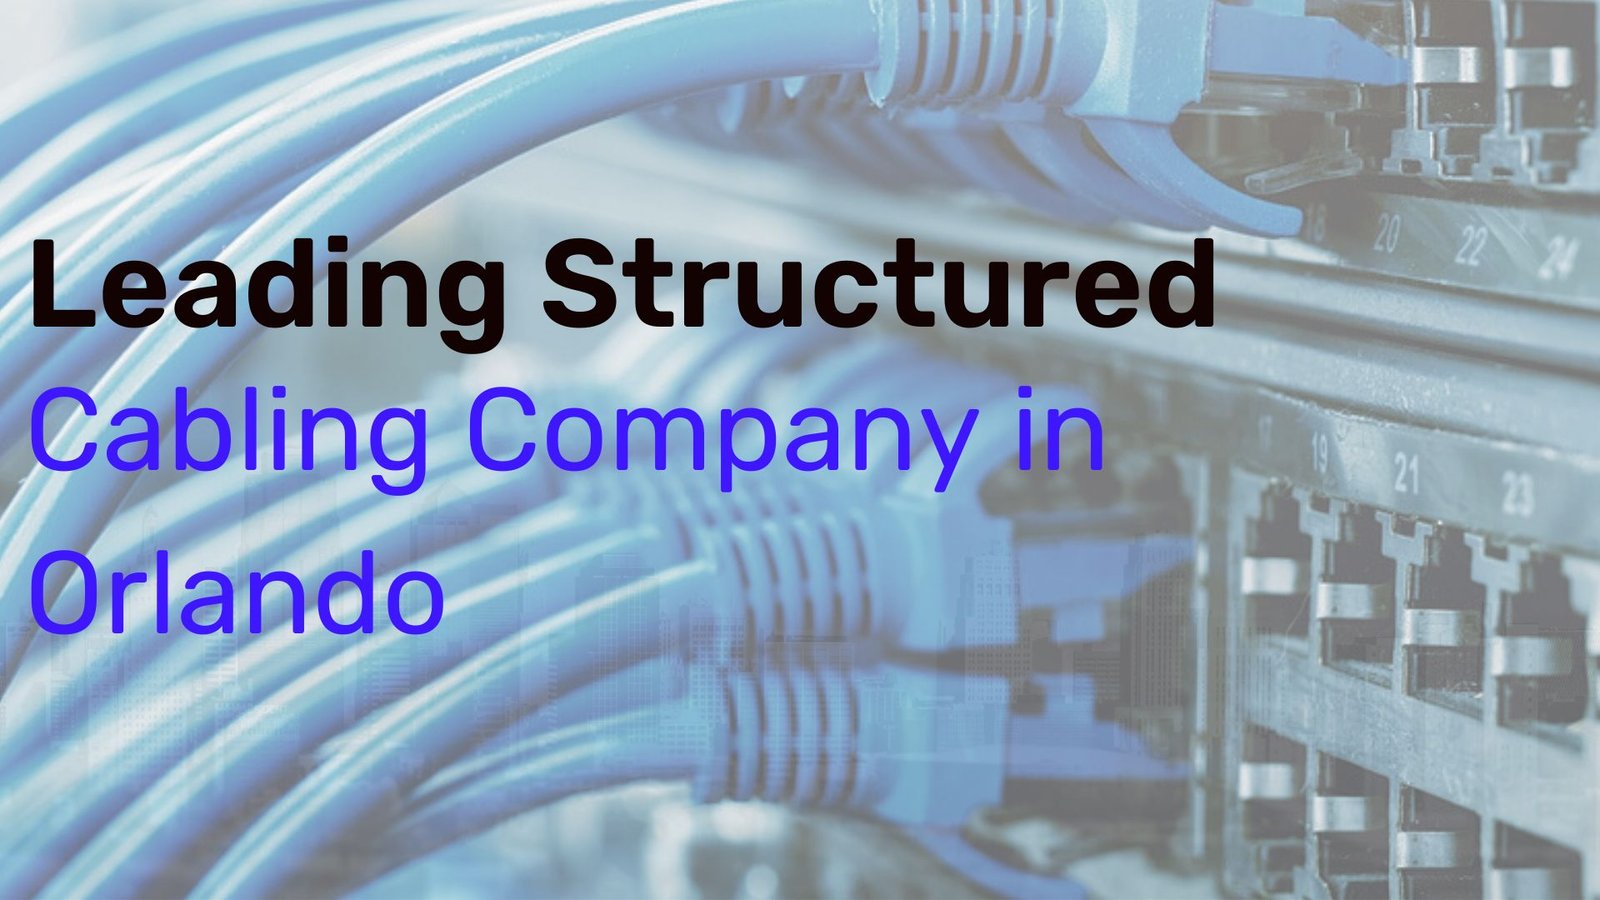 Leading Structured Cabling Company in Orlando